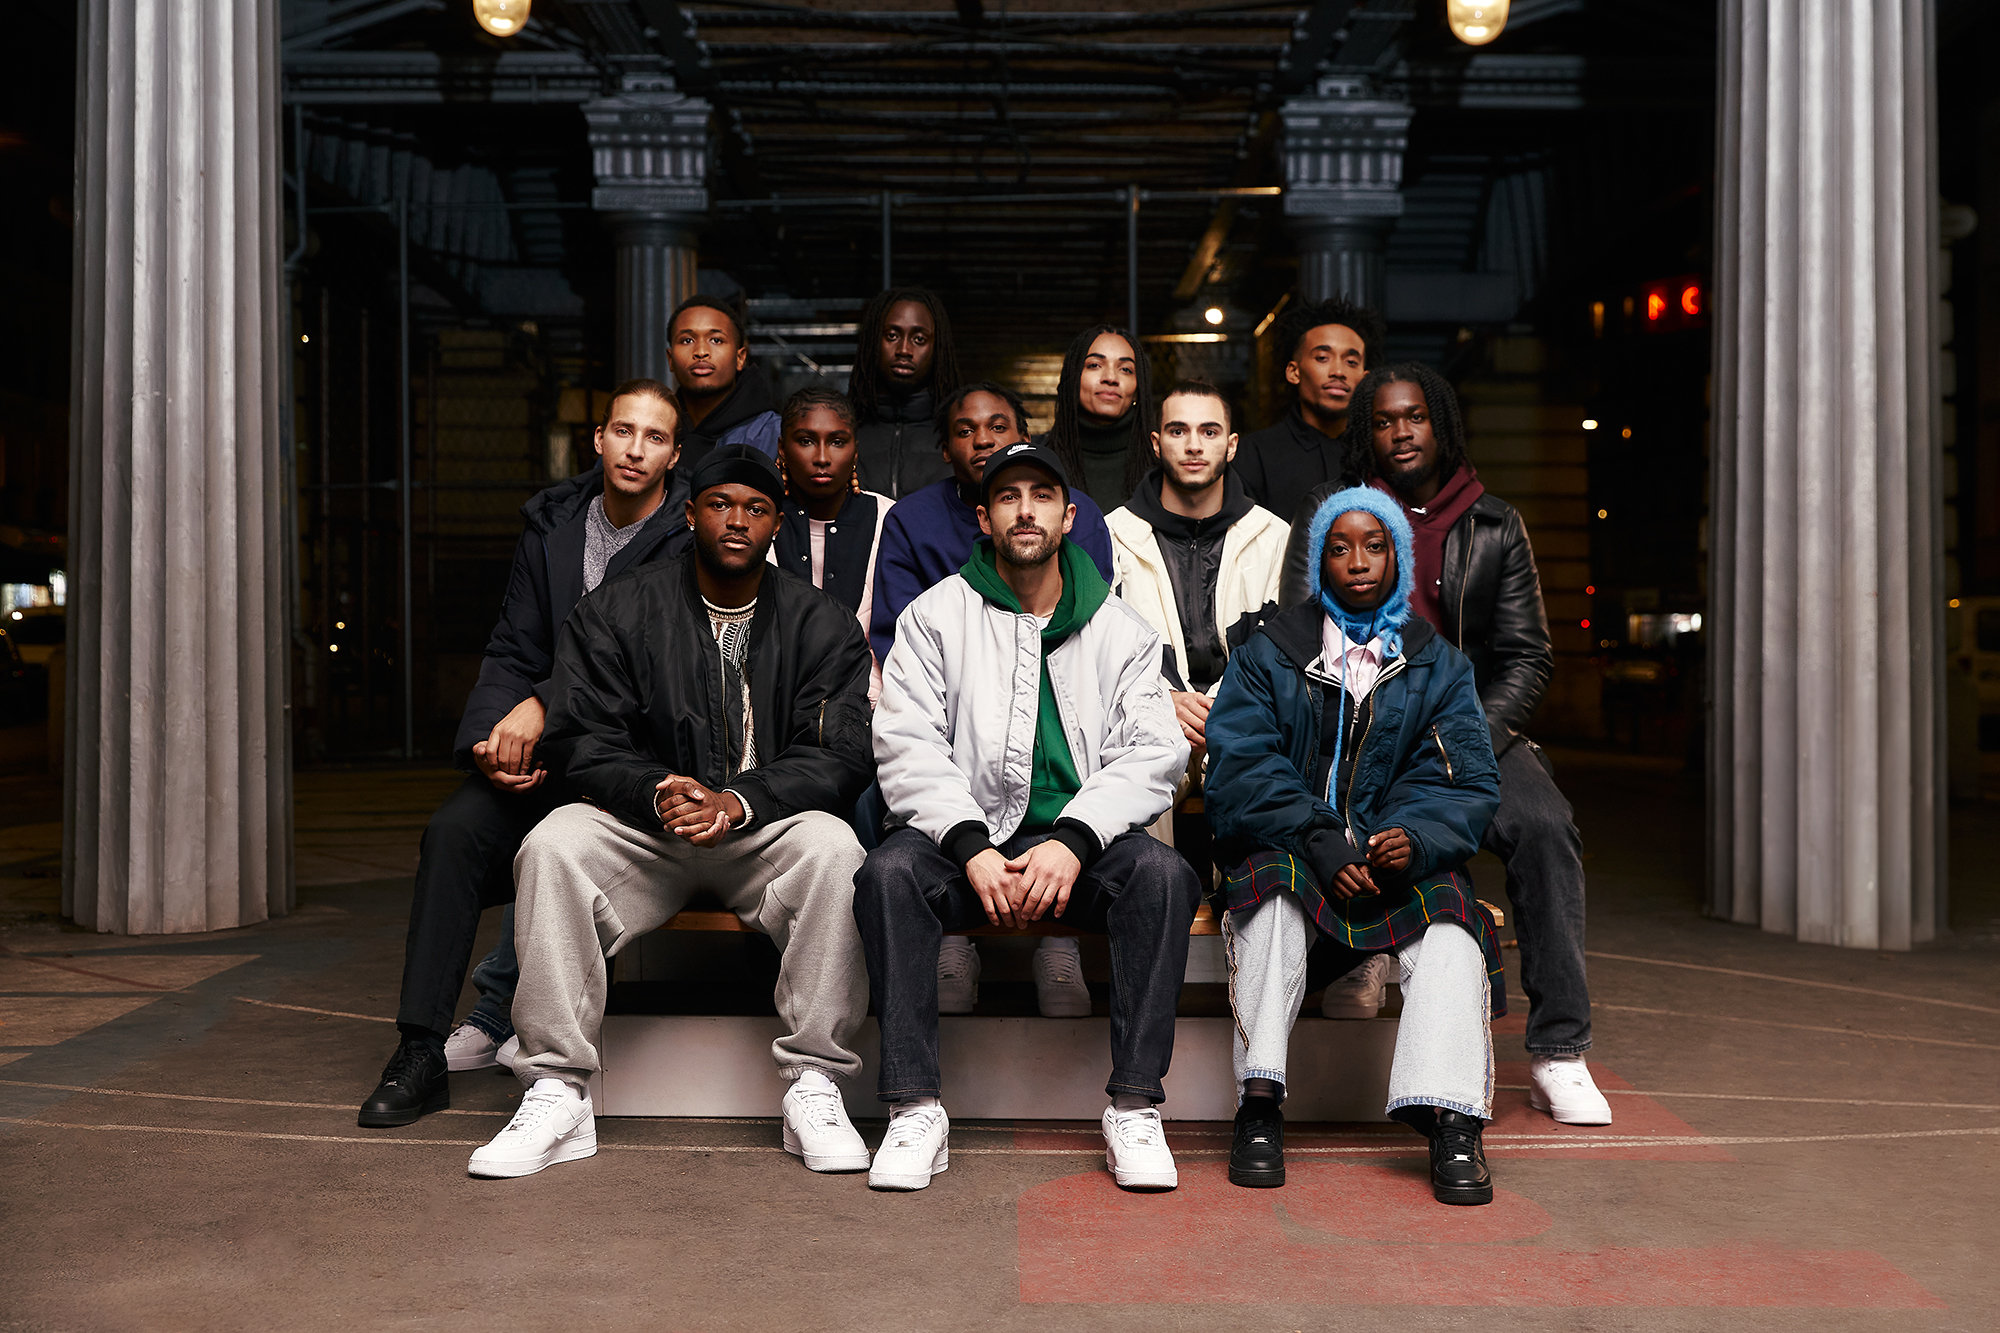 PPG AND NIKE SHOOT HOOPS IN PARIS